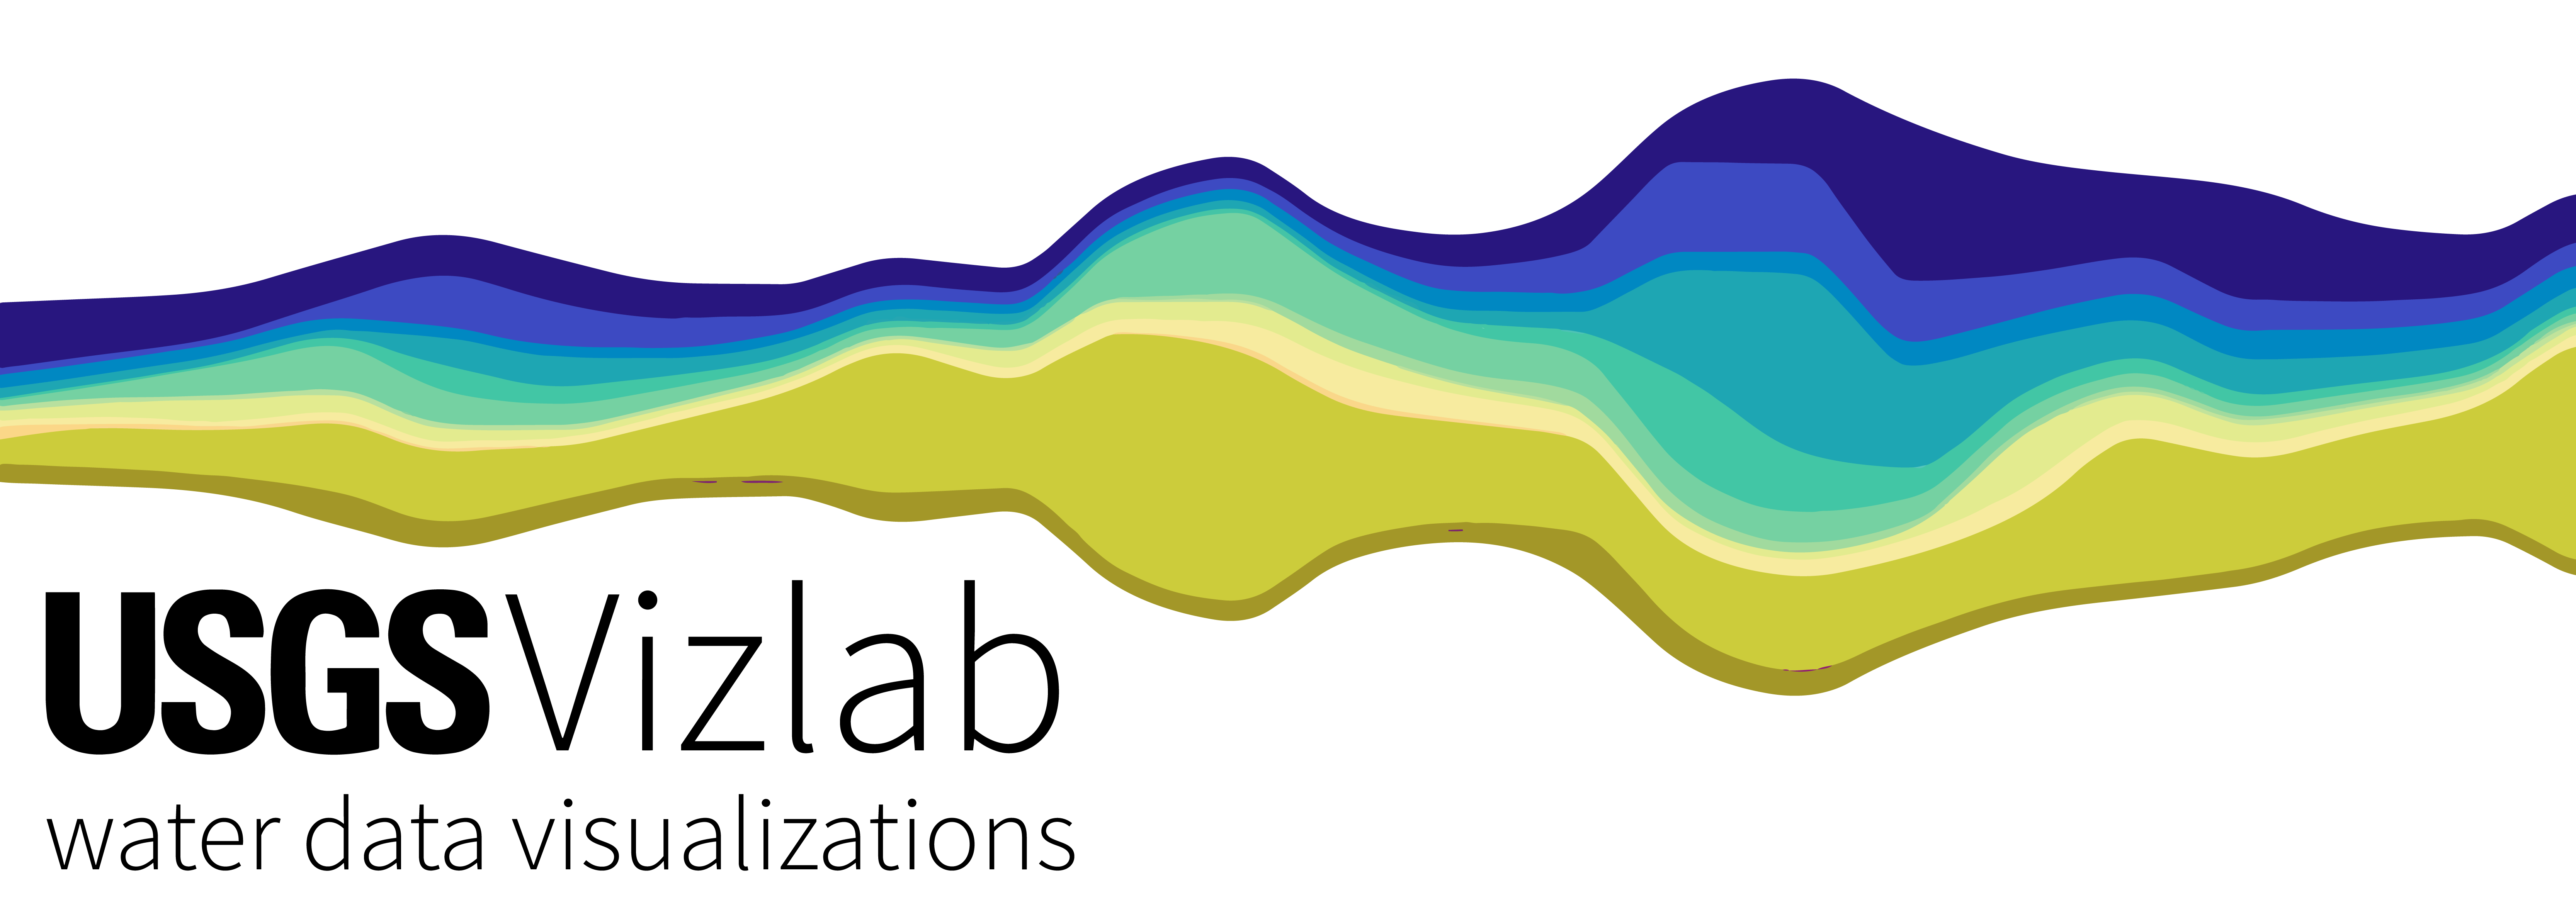 A banner for the USGS Vizlab water data visualization team featuring an abstract streamgraph that mimics flowing water.